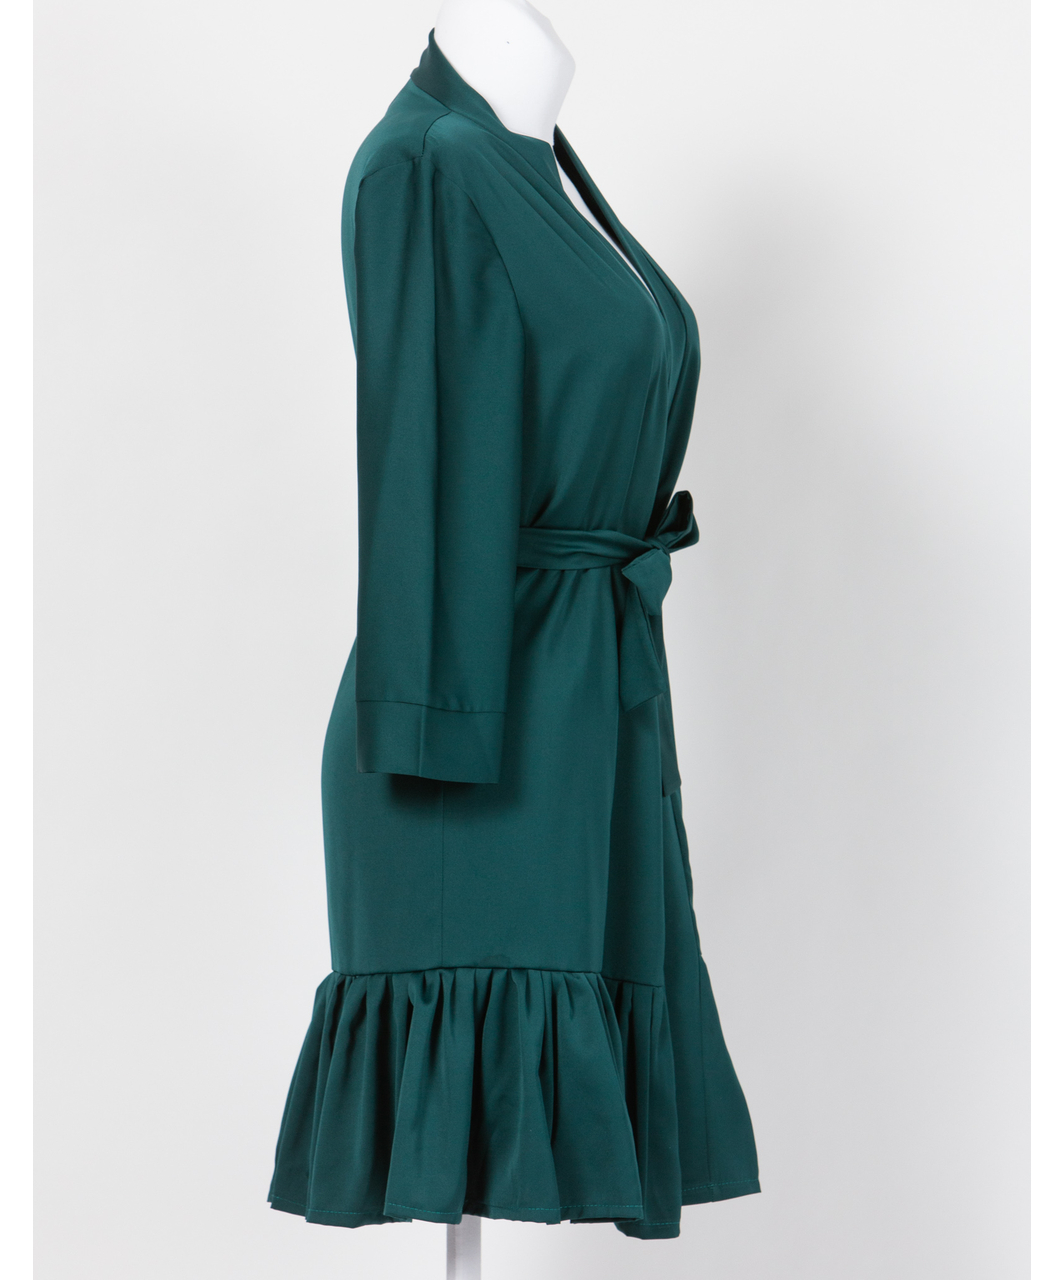 SexyStyle emerald green robe with flounce hem